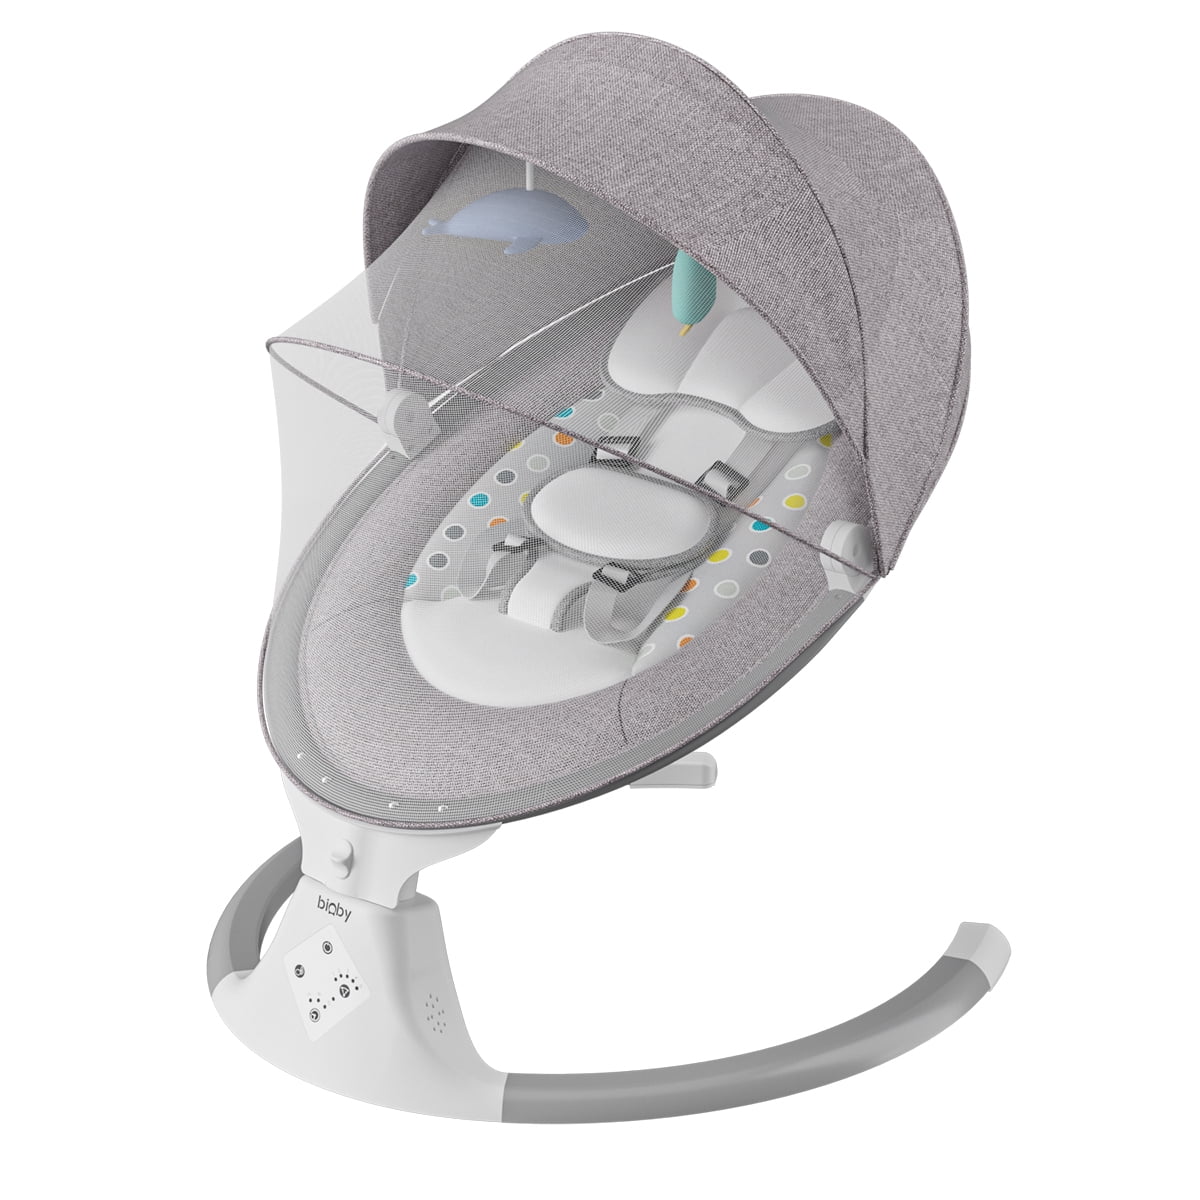 Auto Baby Bouncer Swing Chair Baby 